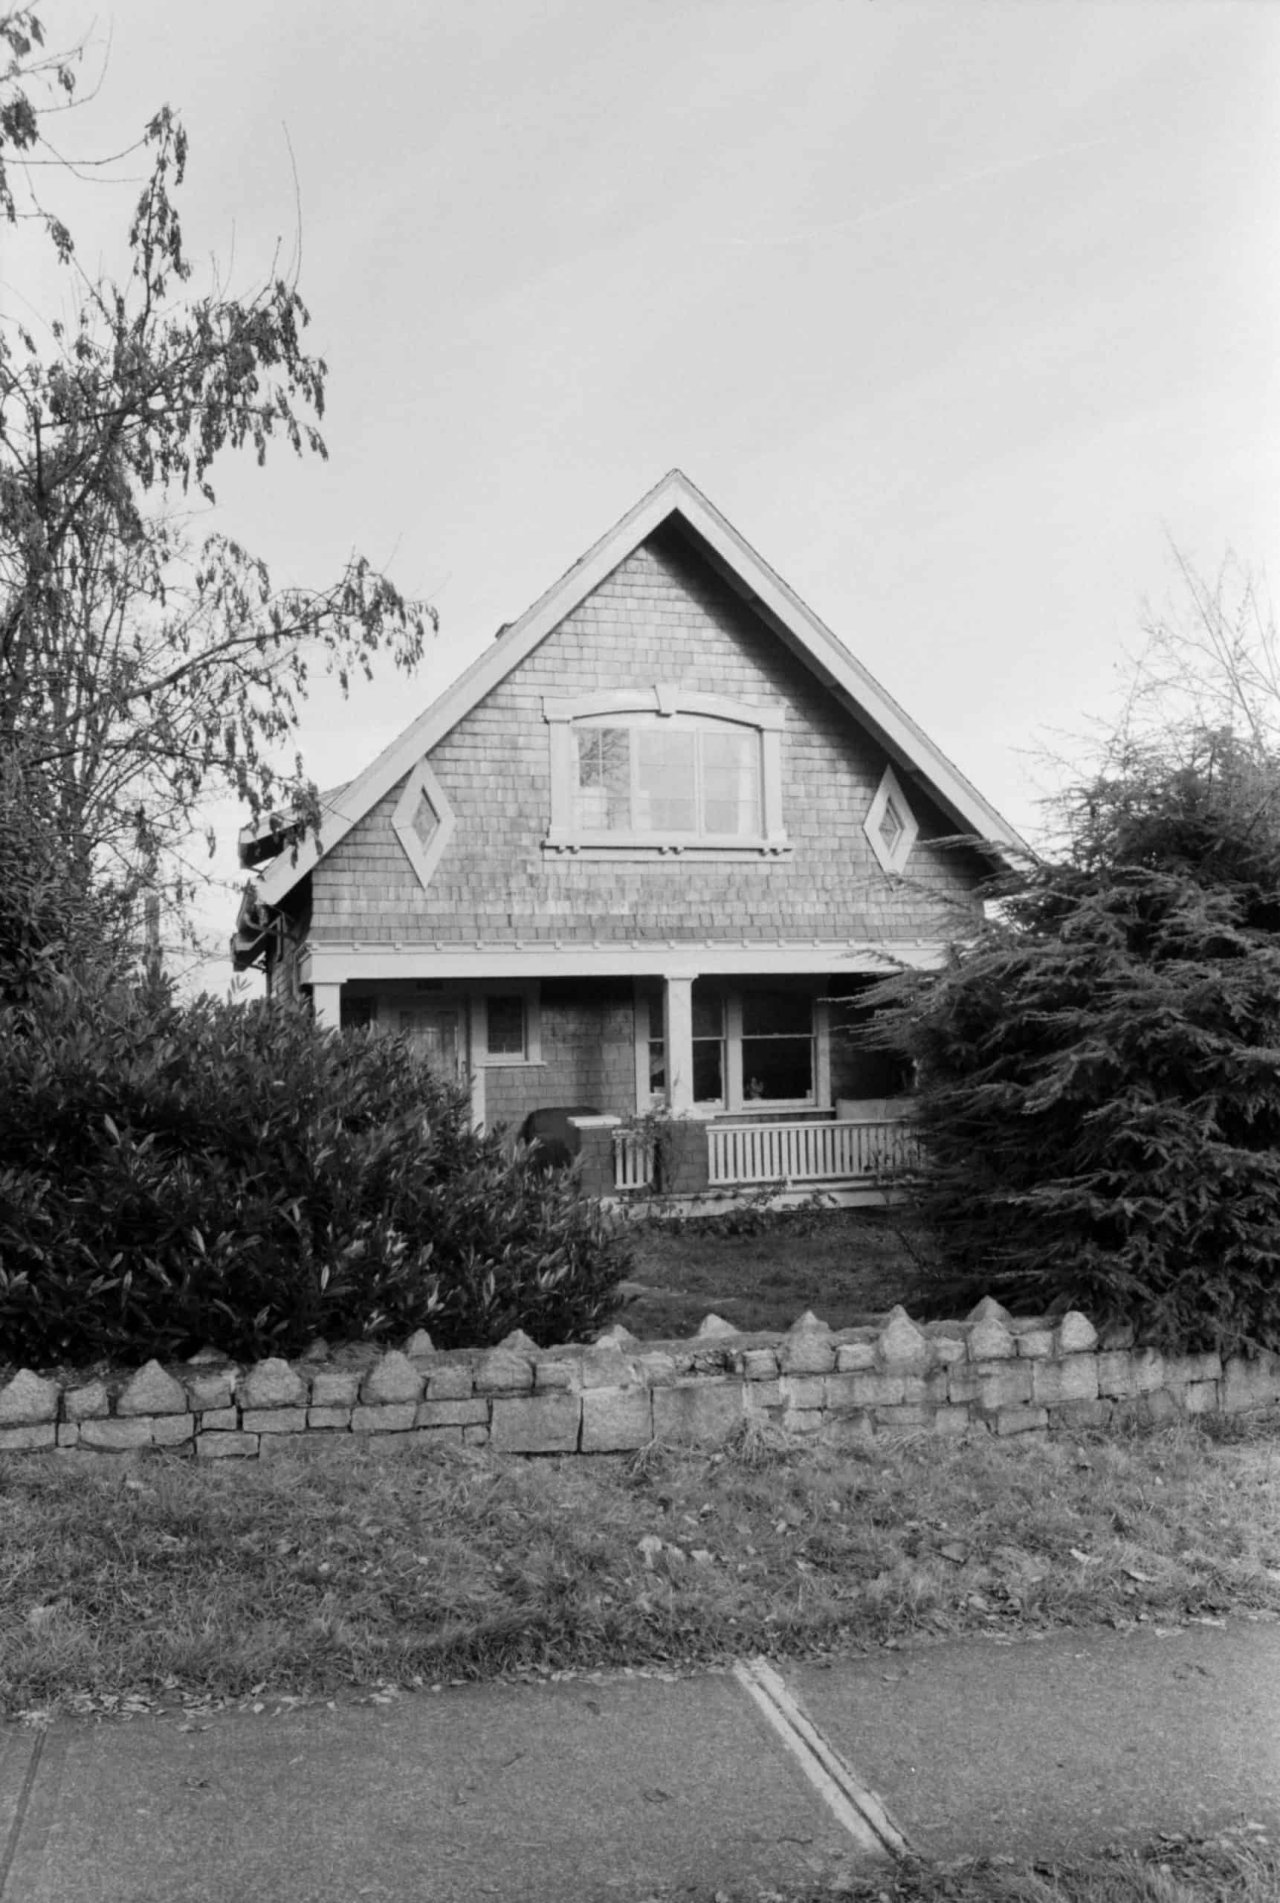 3737 West 11th Avenue In the 1980s. City of Vancouver Archives, CVA 790-1939.